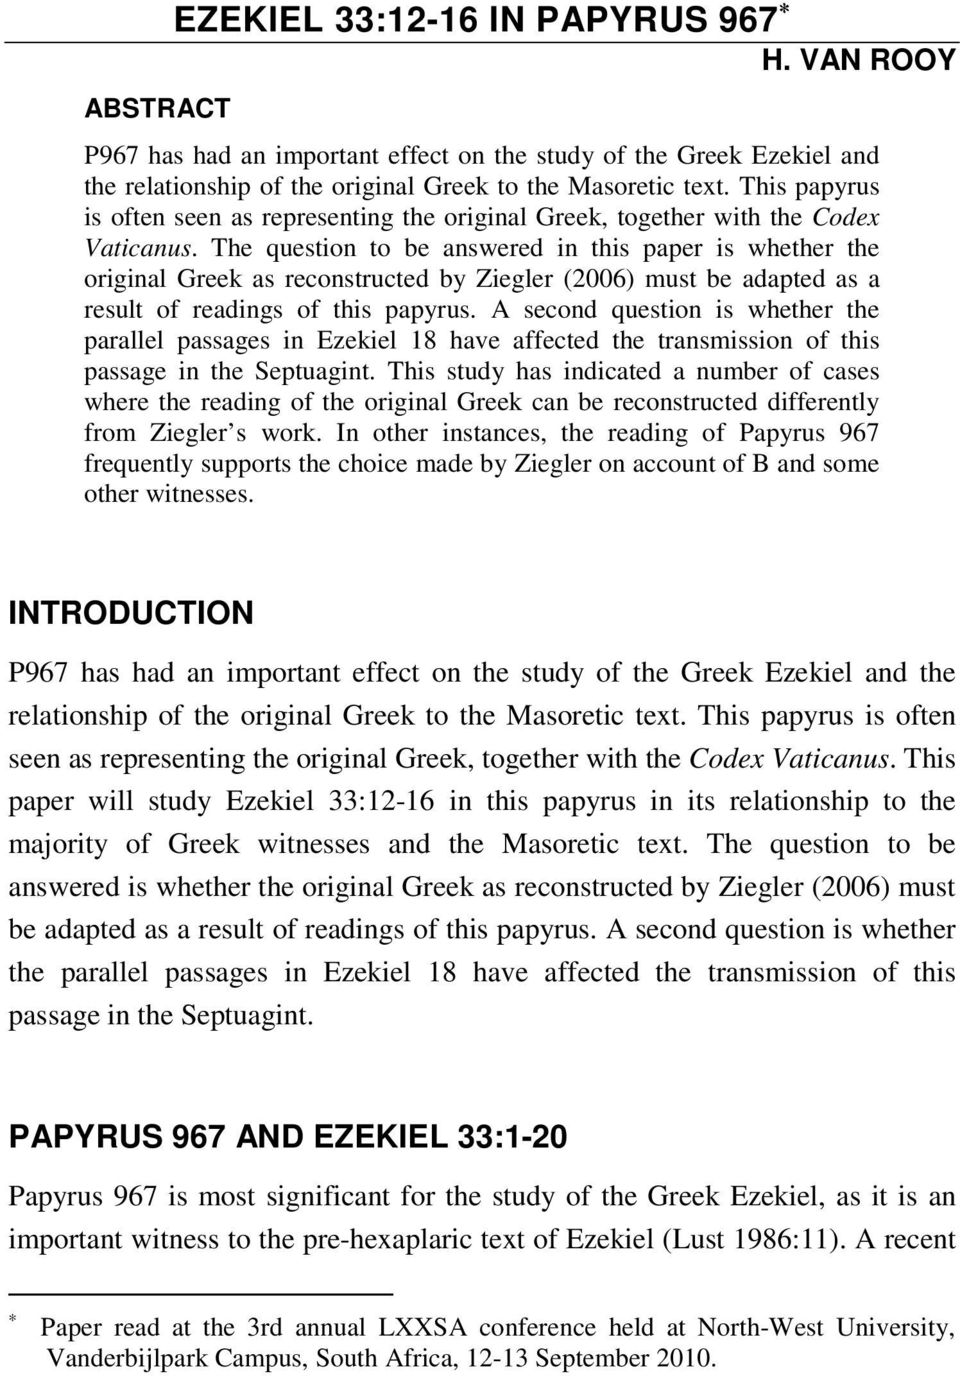 The question to be answered in this paper is whether the original Greek as reconstructed by Ziegler (2006) must be adapted as a result of readings of this papyrus.